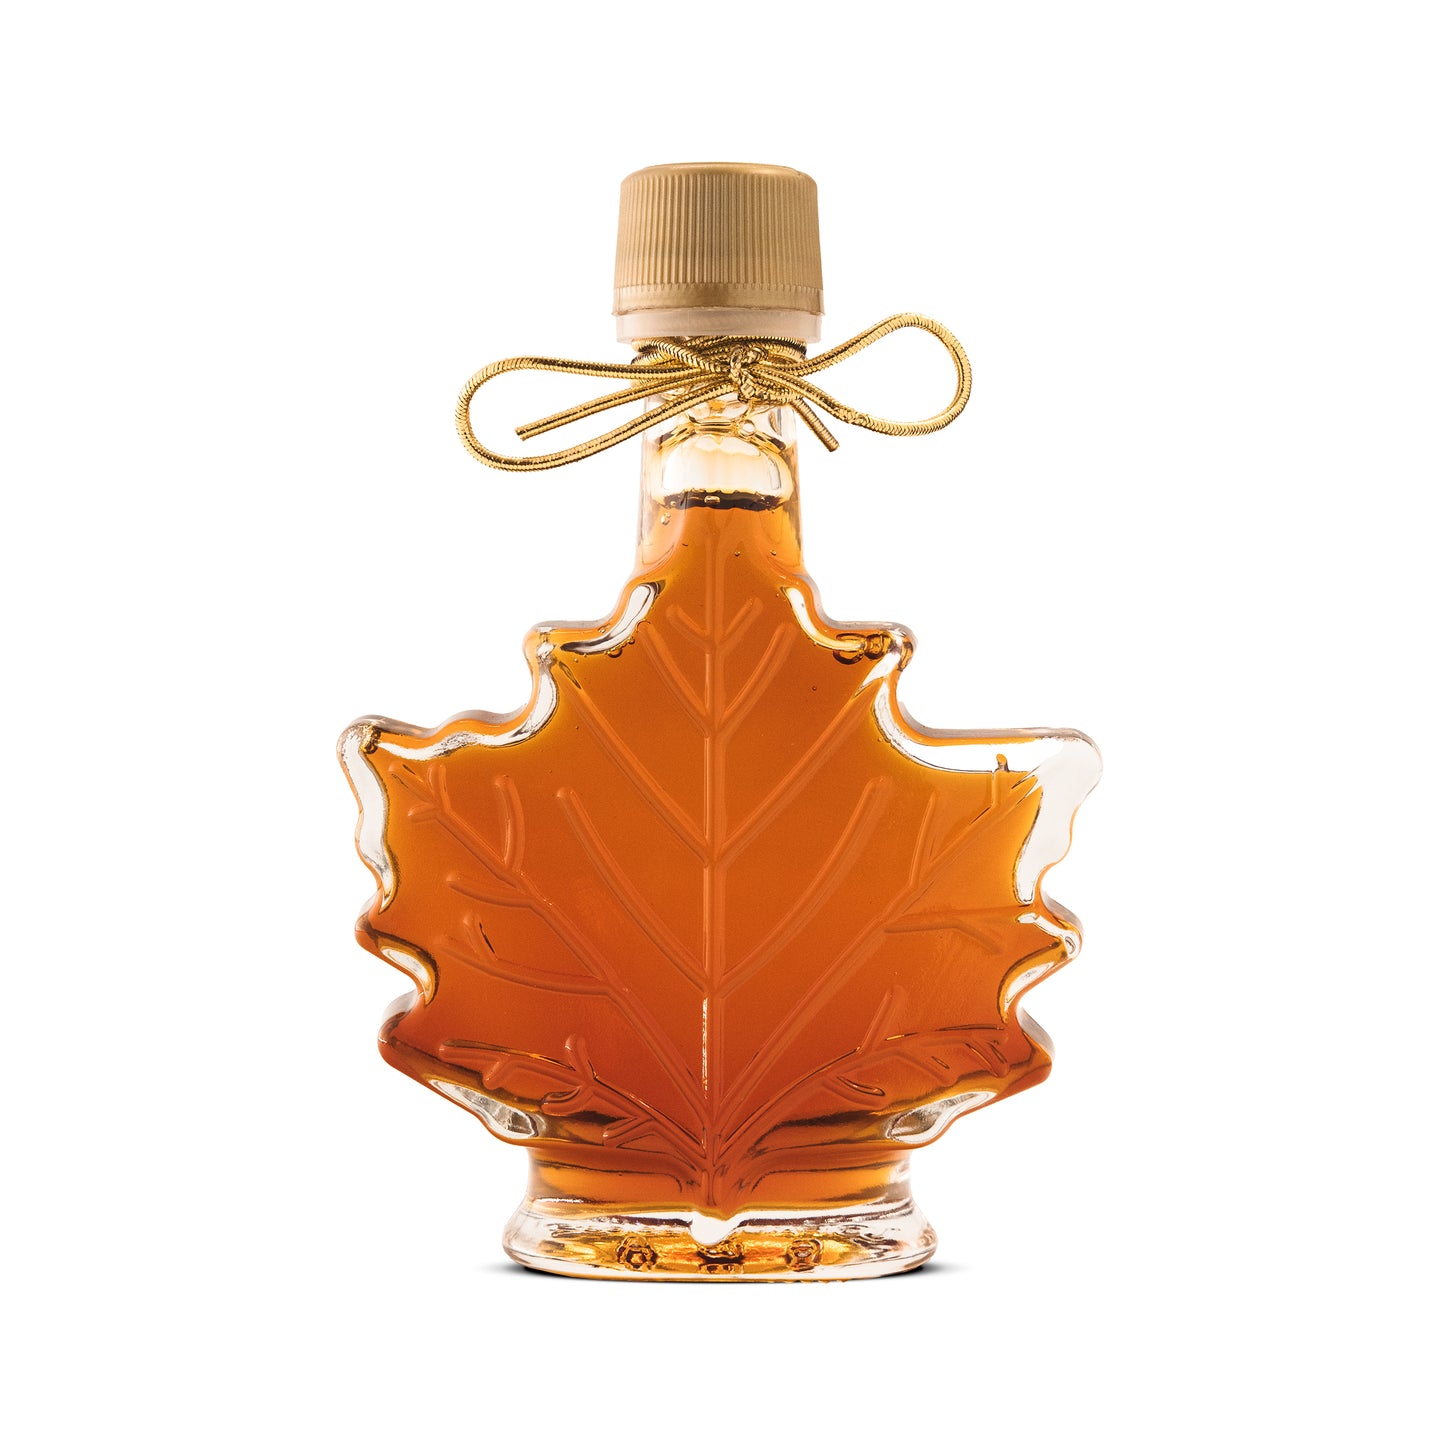 Pure Maple Syrup Favors - Glass Leaf Bottle - 1.7 oz